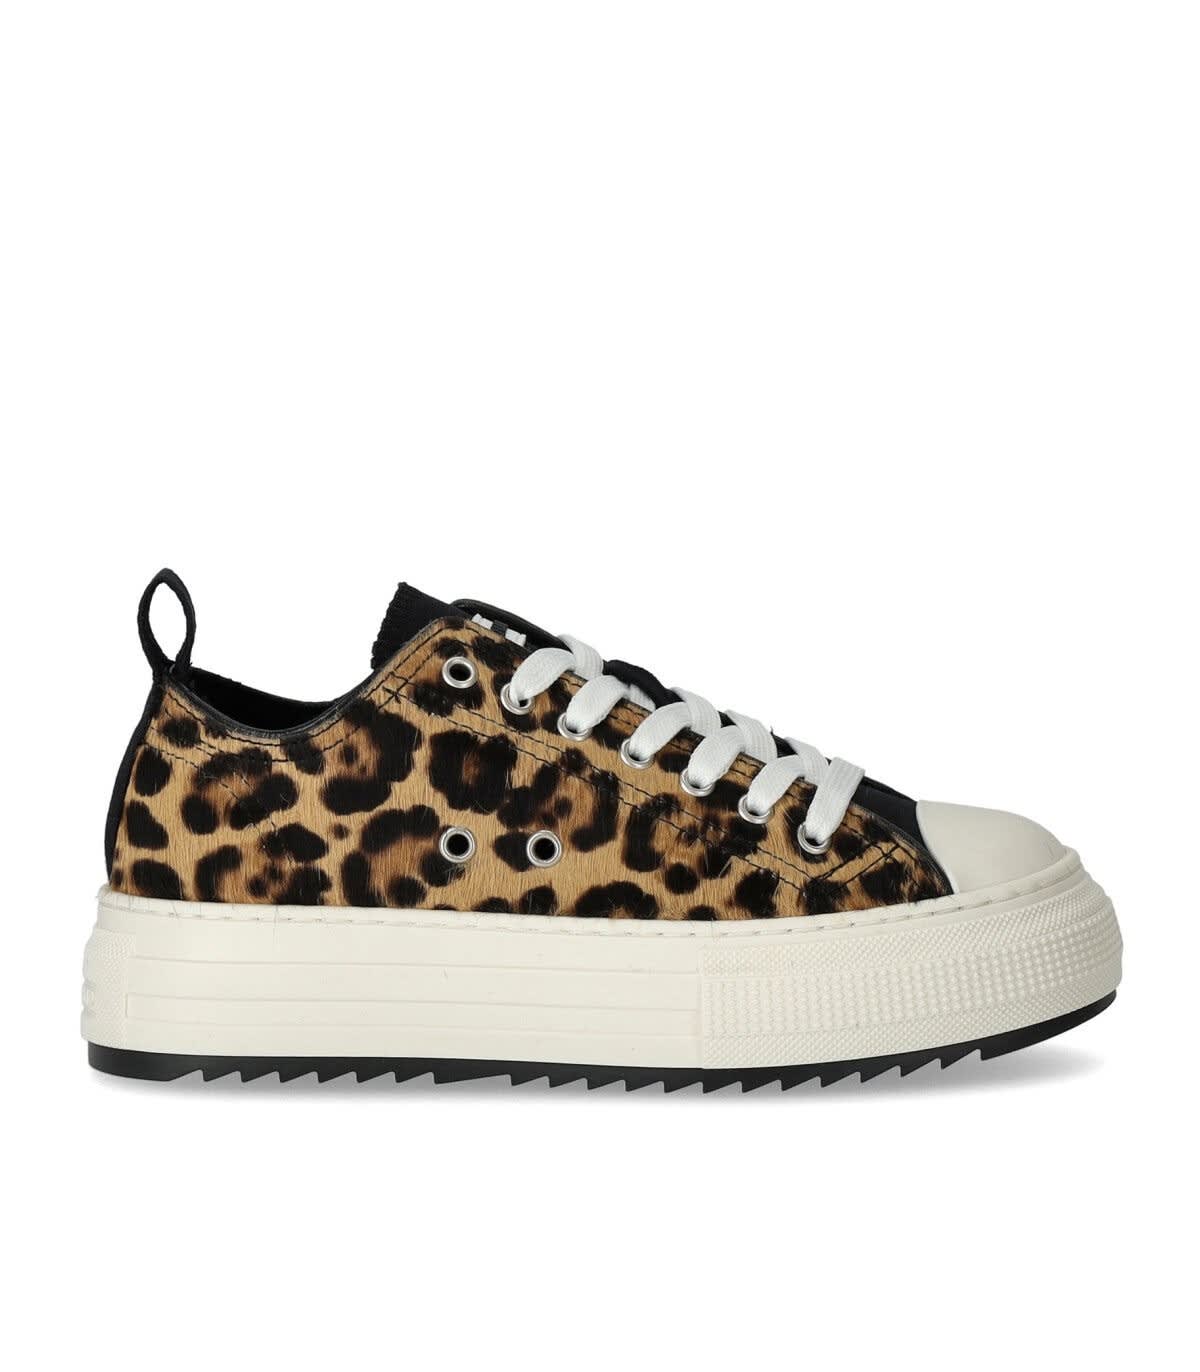 DSQUARED2 BERLIN LEOPARD PRINED LACE-UP SNEAKERS